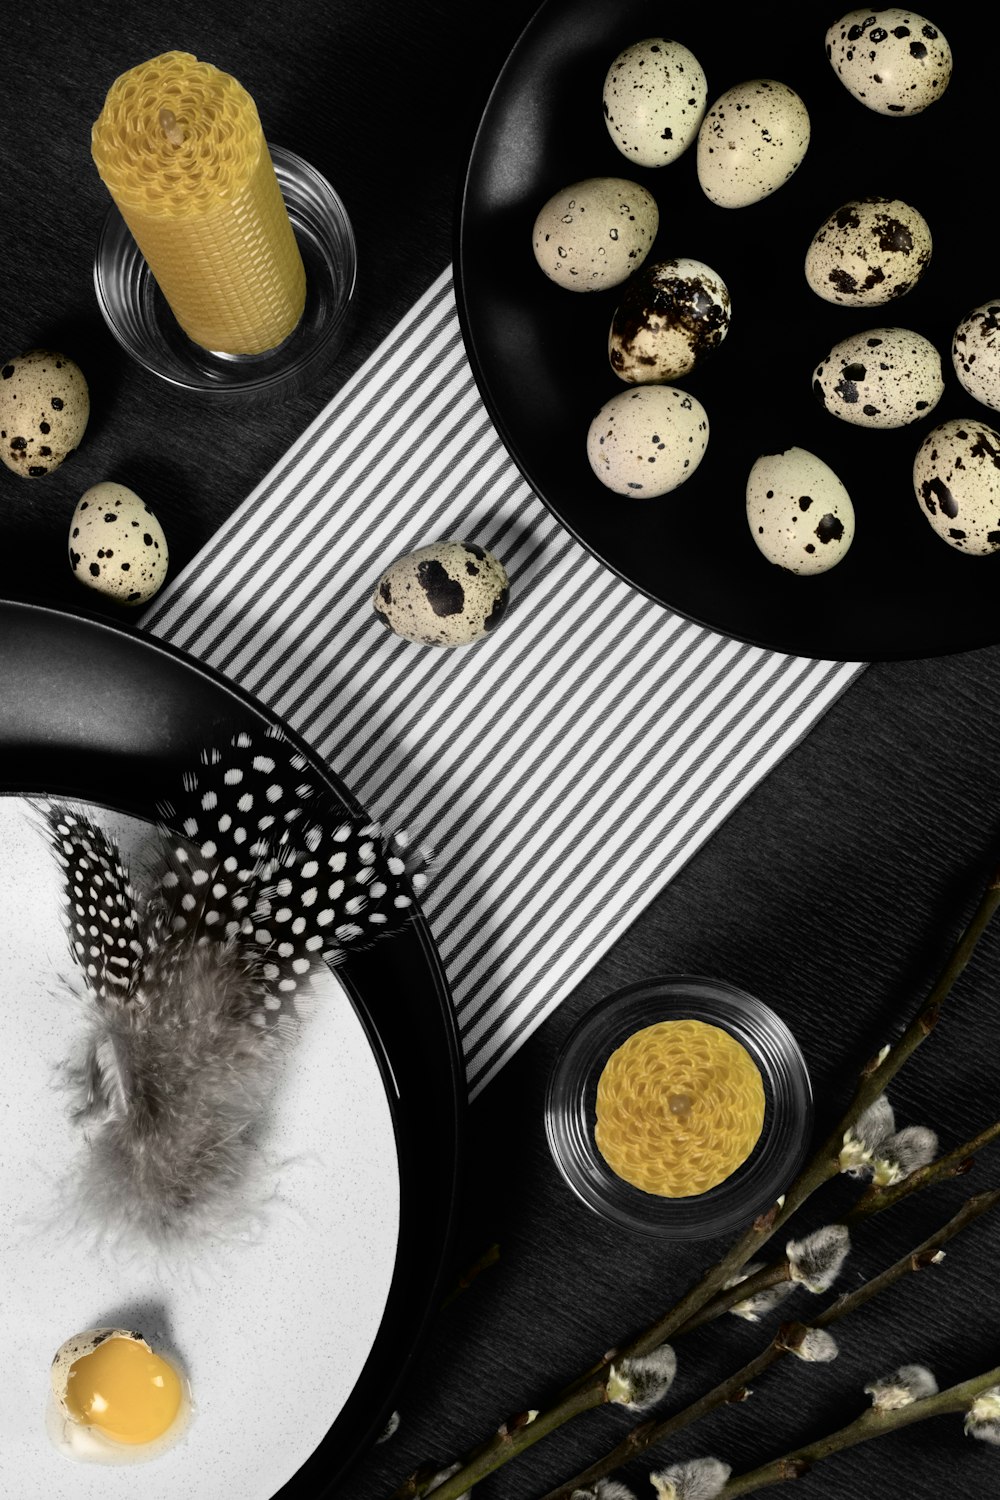 black and white polka dot plate with stainless steel fork and knife